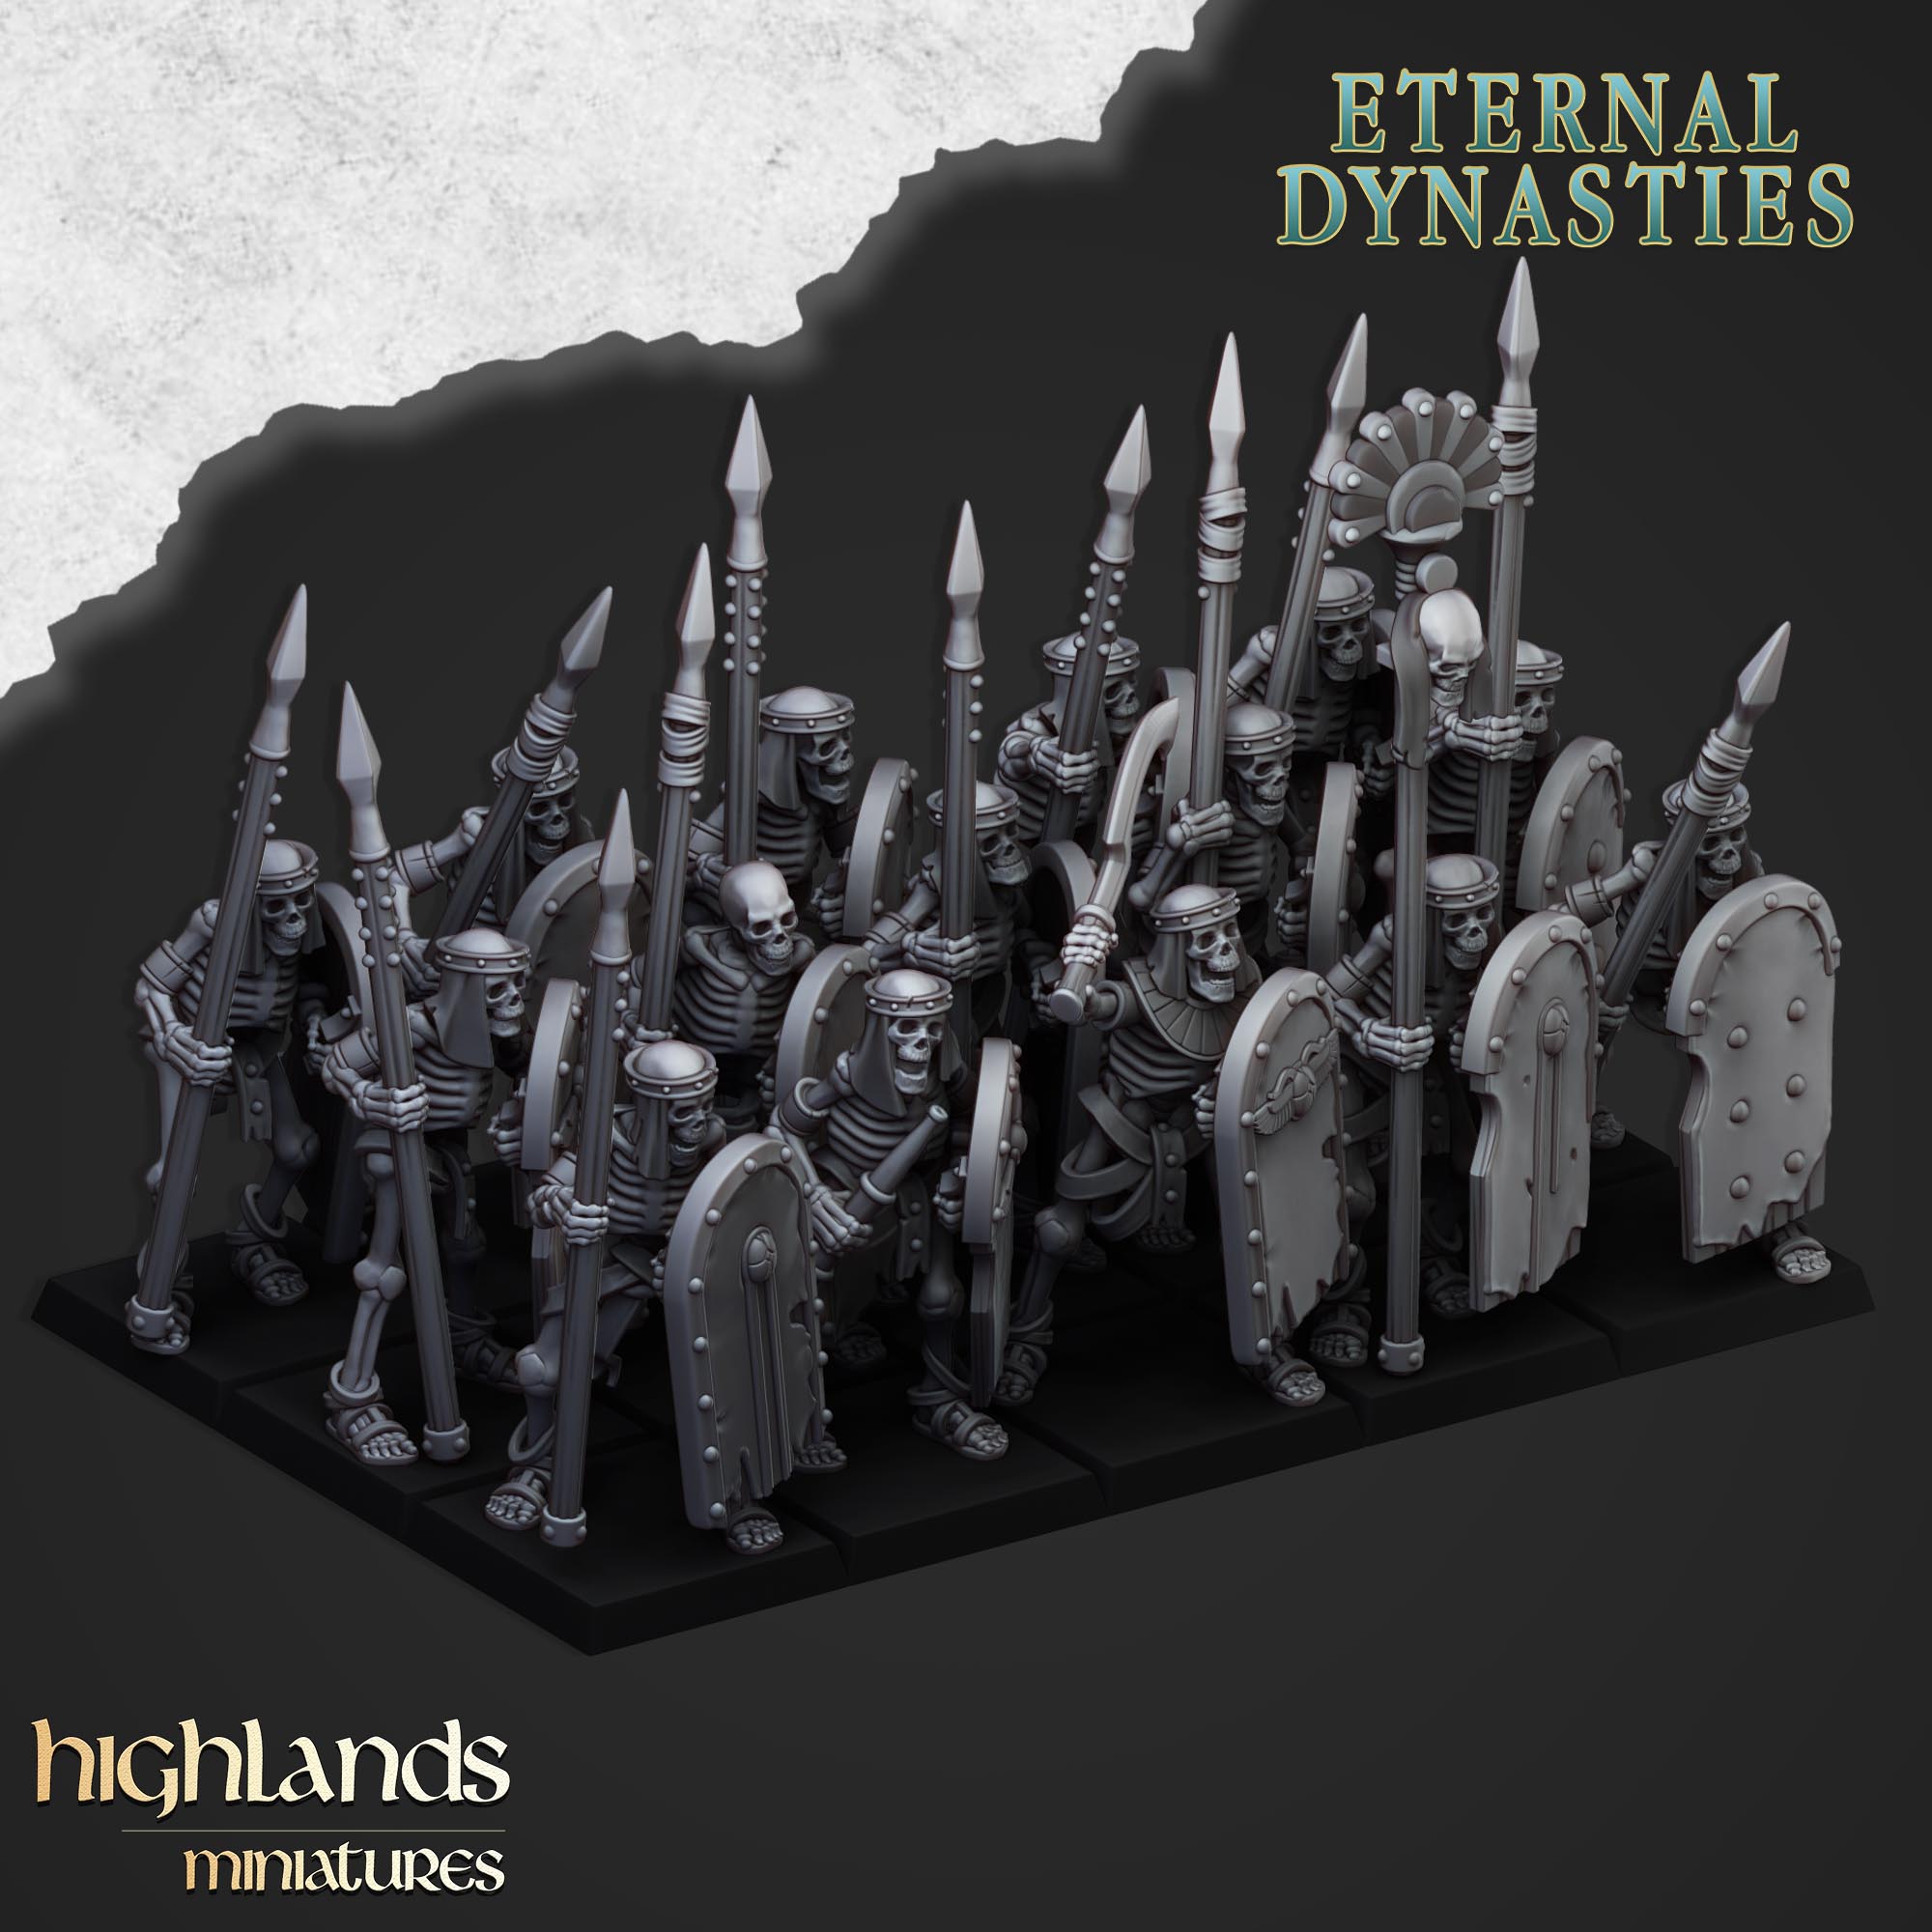 Ancient Skeletons with Spears - Eternal Dynasties - | Highlands Miniatures